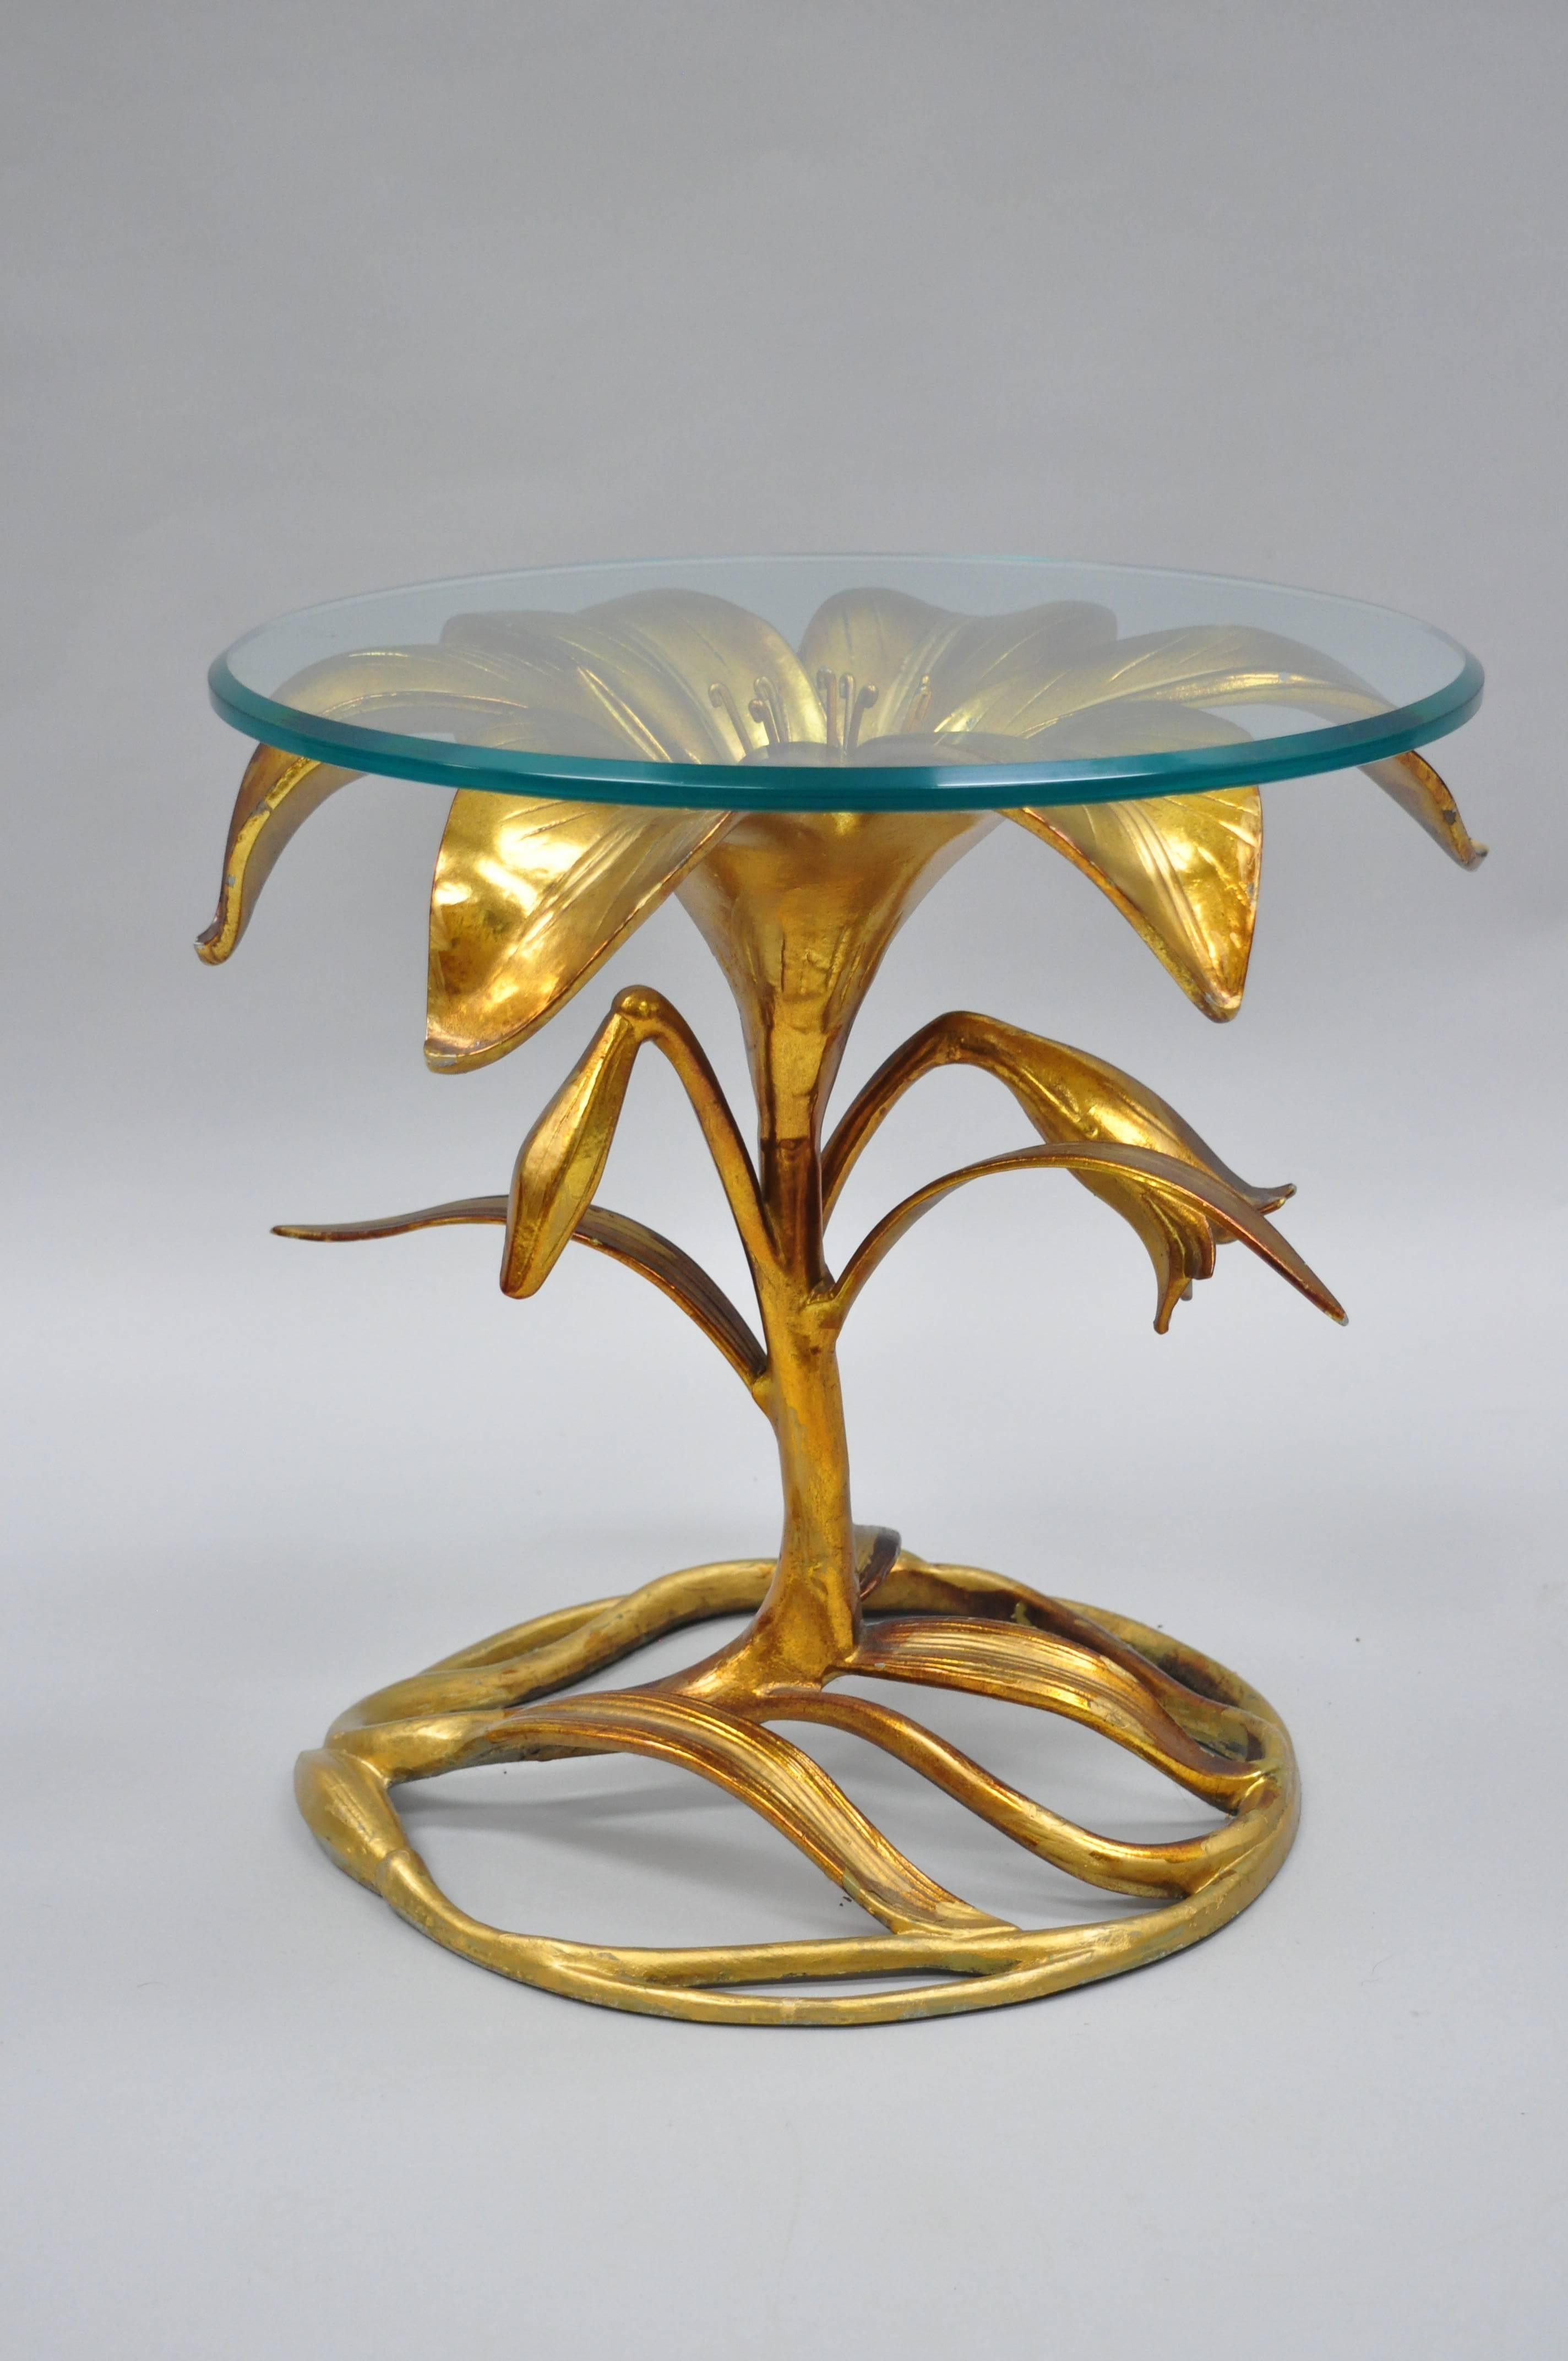 Vintage Arthur Court Hollywood Regency glass top gold lily leaf flower side table. Item features a gold finish, cast aluminium construction, beveled round glass top, great style and form, circa 1960s. Measurements: 17 H x 17